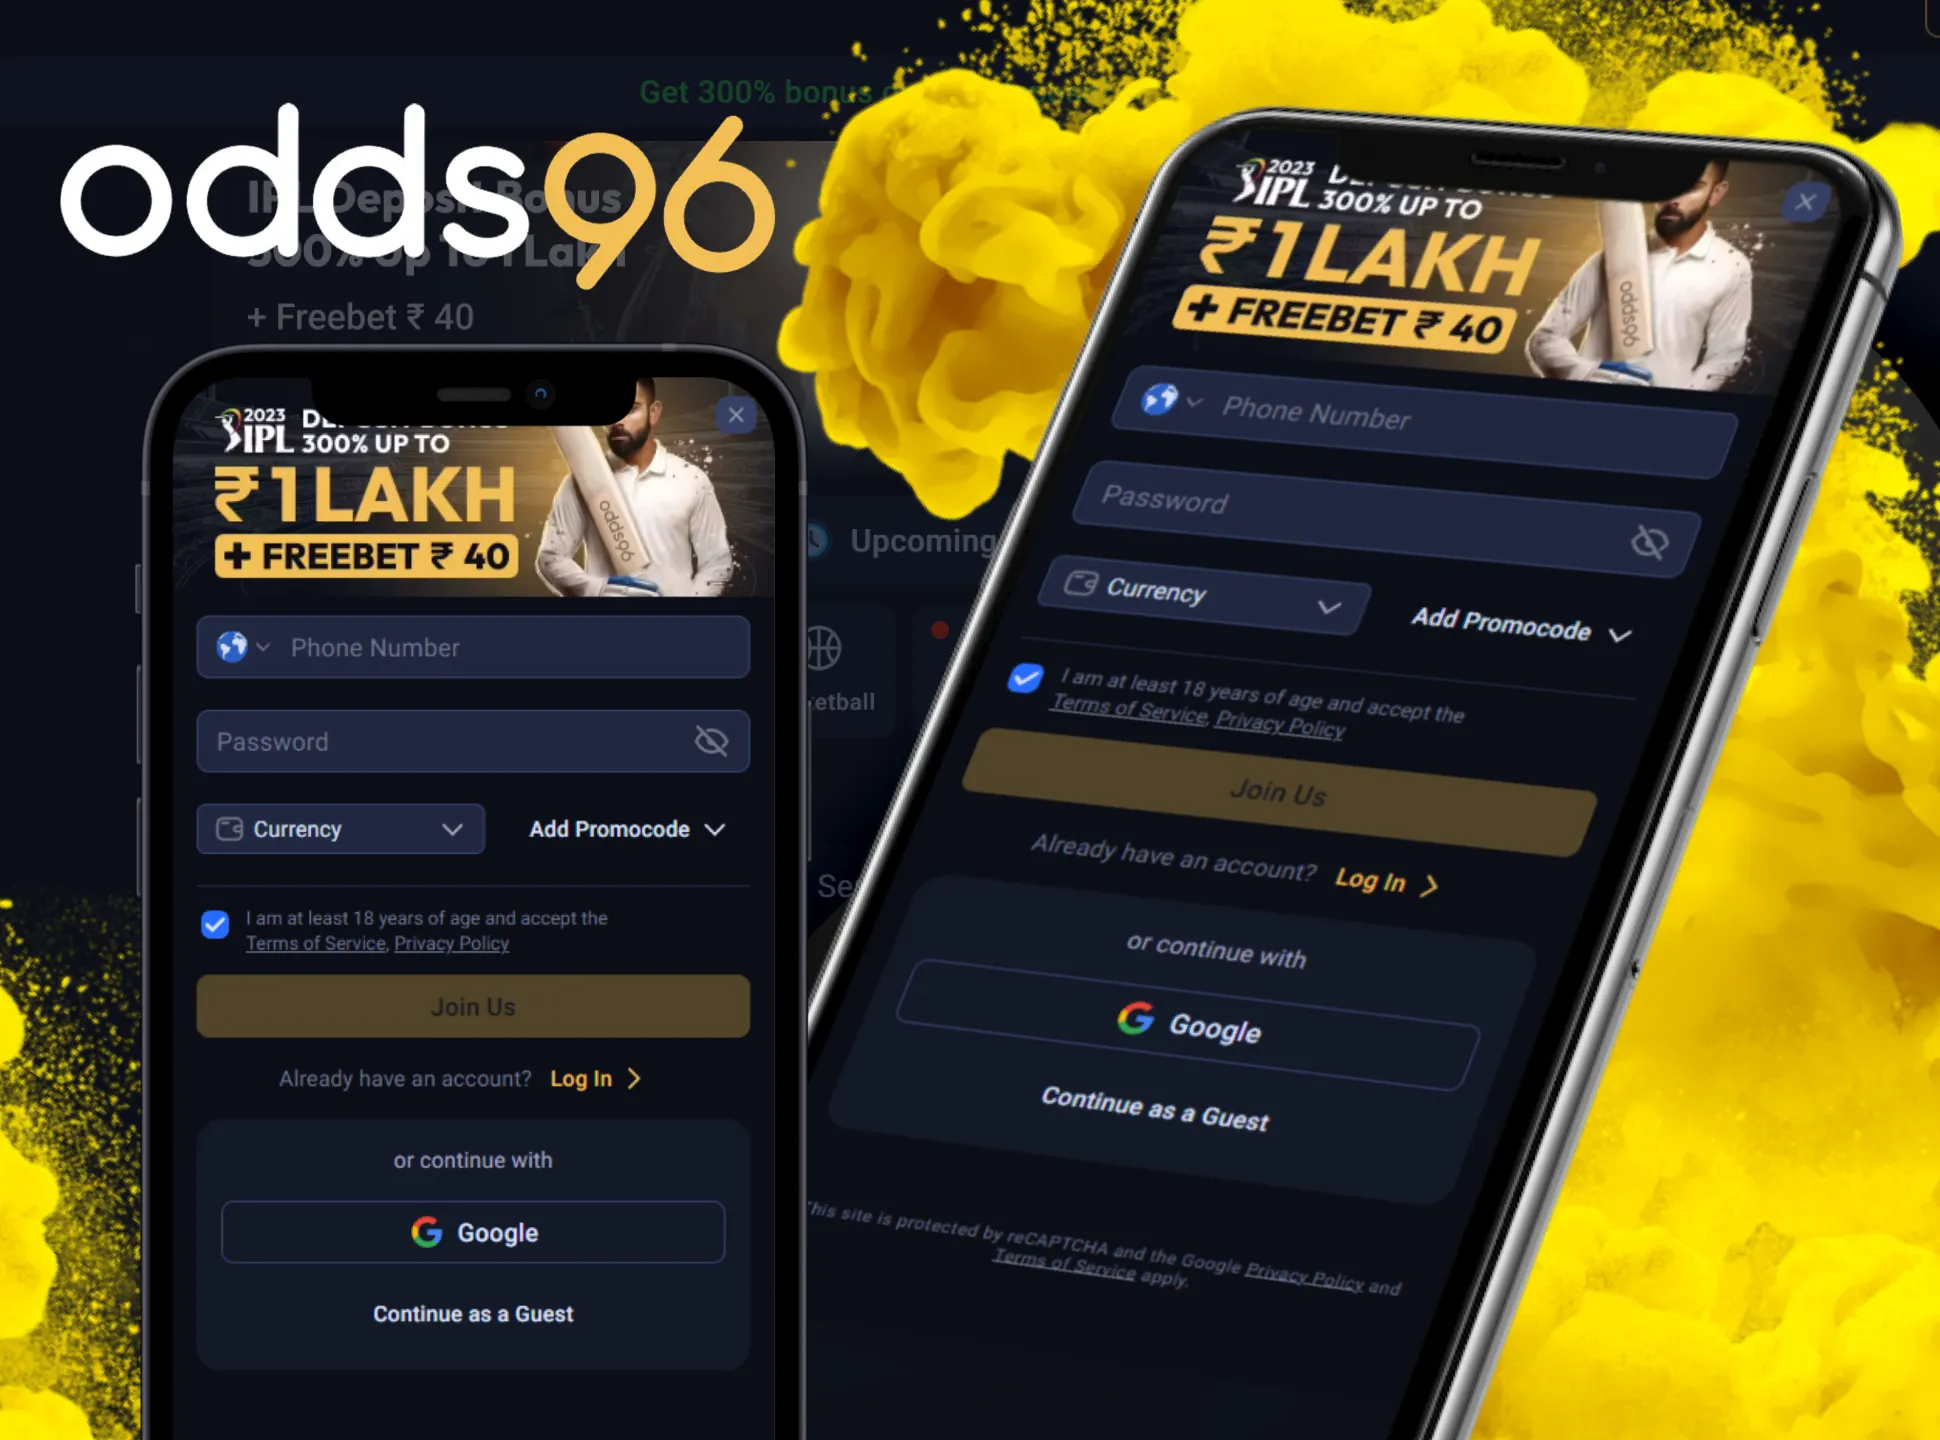 It's simple to register account in Odds96 app.